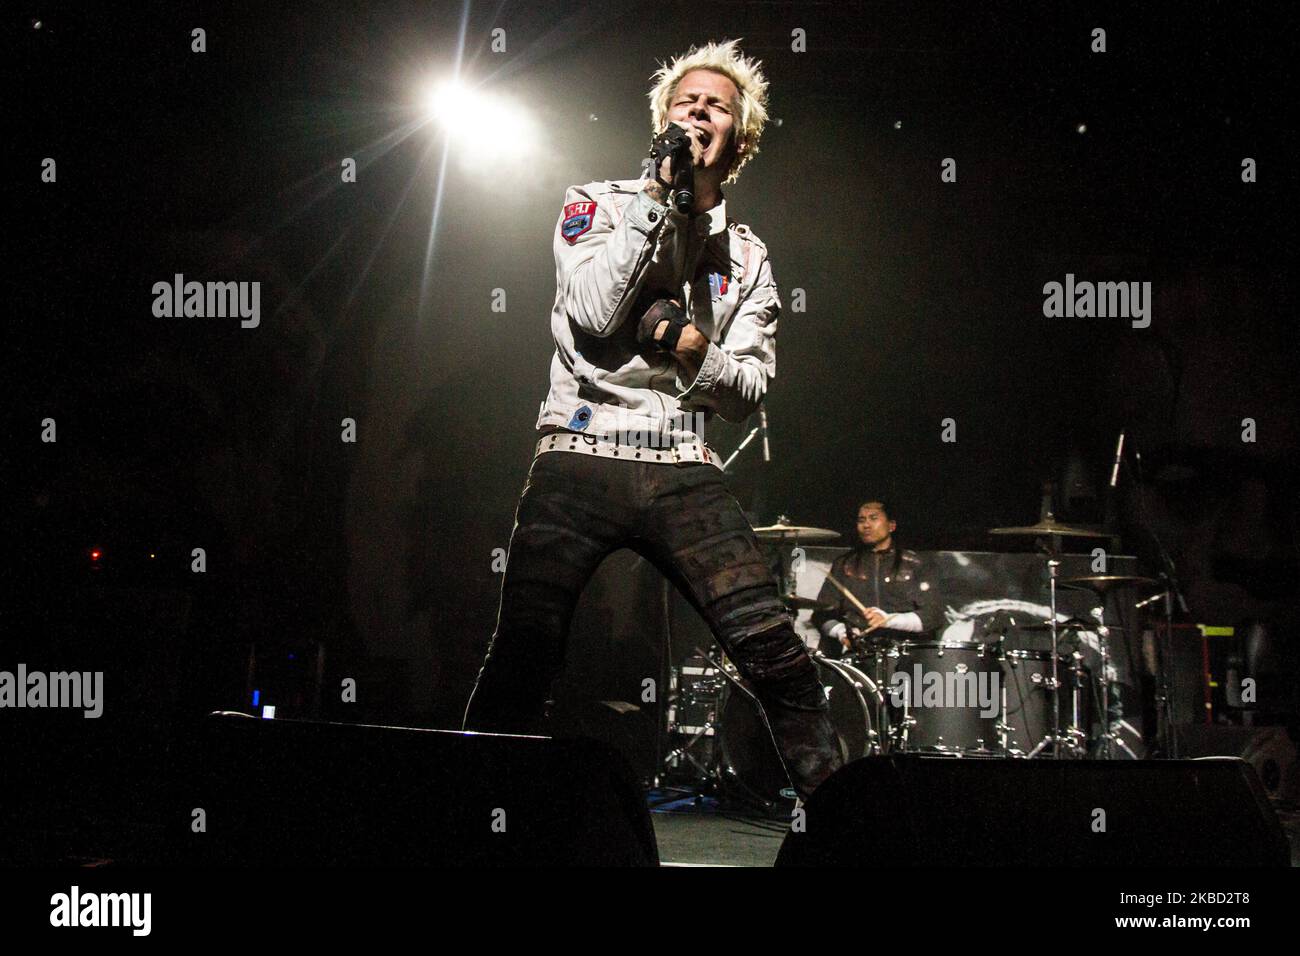 Spider one of Powerman 5000 performs live in Milano, Italy, on June 27 2014. Powerman 5000, which frontman Spider One is the younger brother of fellow metal musician Rob Zombie, is an American Industrial metal band formed in 1991. The group has released nine albums, gaining its highest level of commercial success with 1999's Tonight the Stars Revolt!, which reached number 29 on the Billboard 200 while spawning the singles When Worlds Collide and Nobody's Real (Photo by Mairo Cinquetti/NurPhoto) Stock Photo